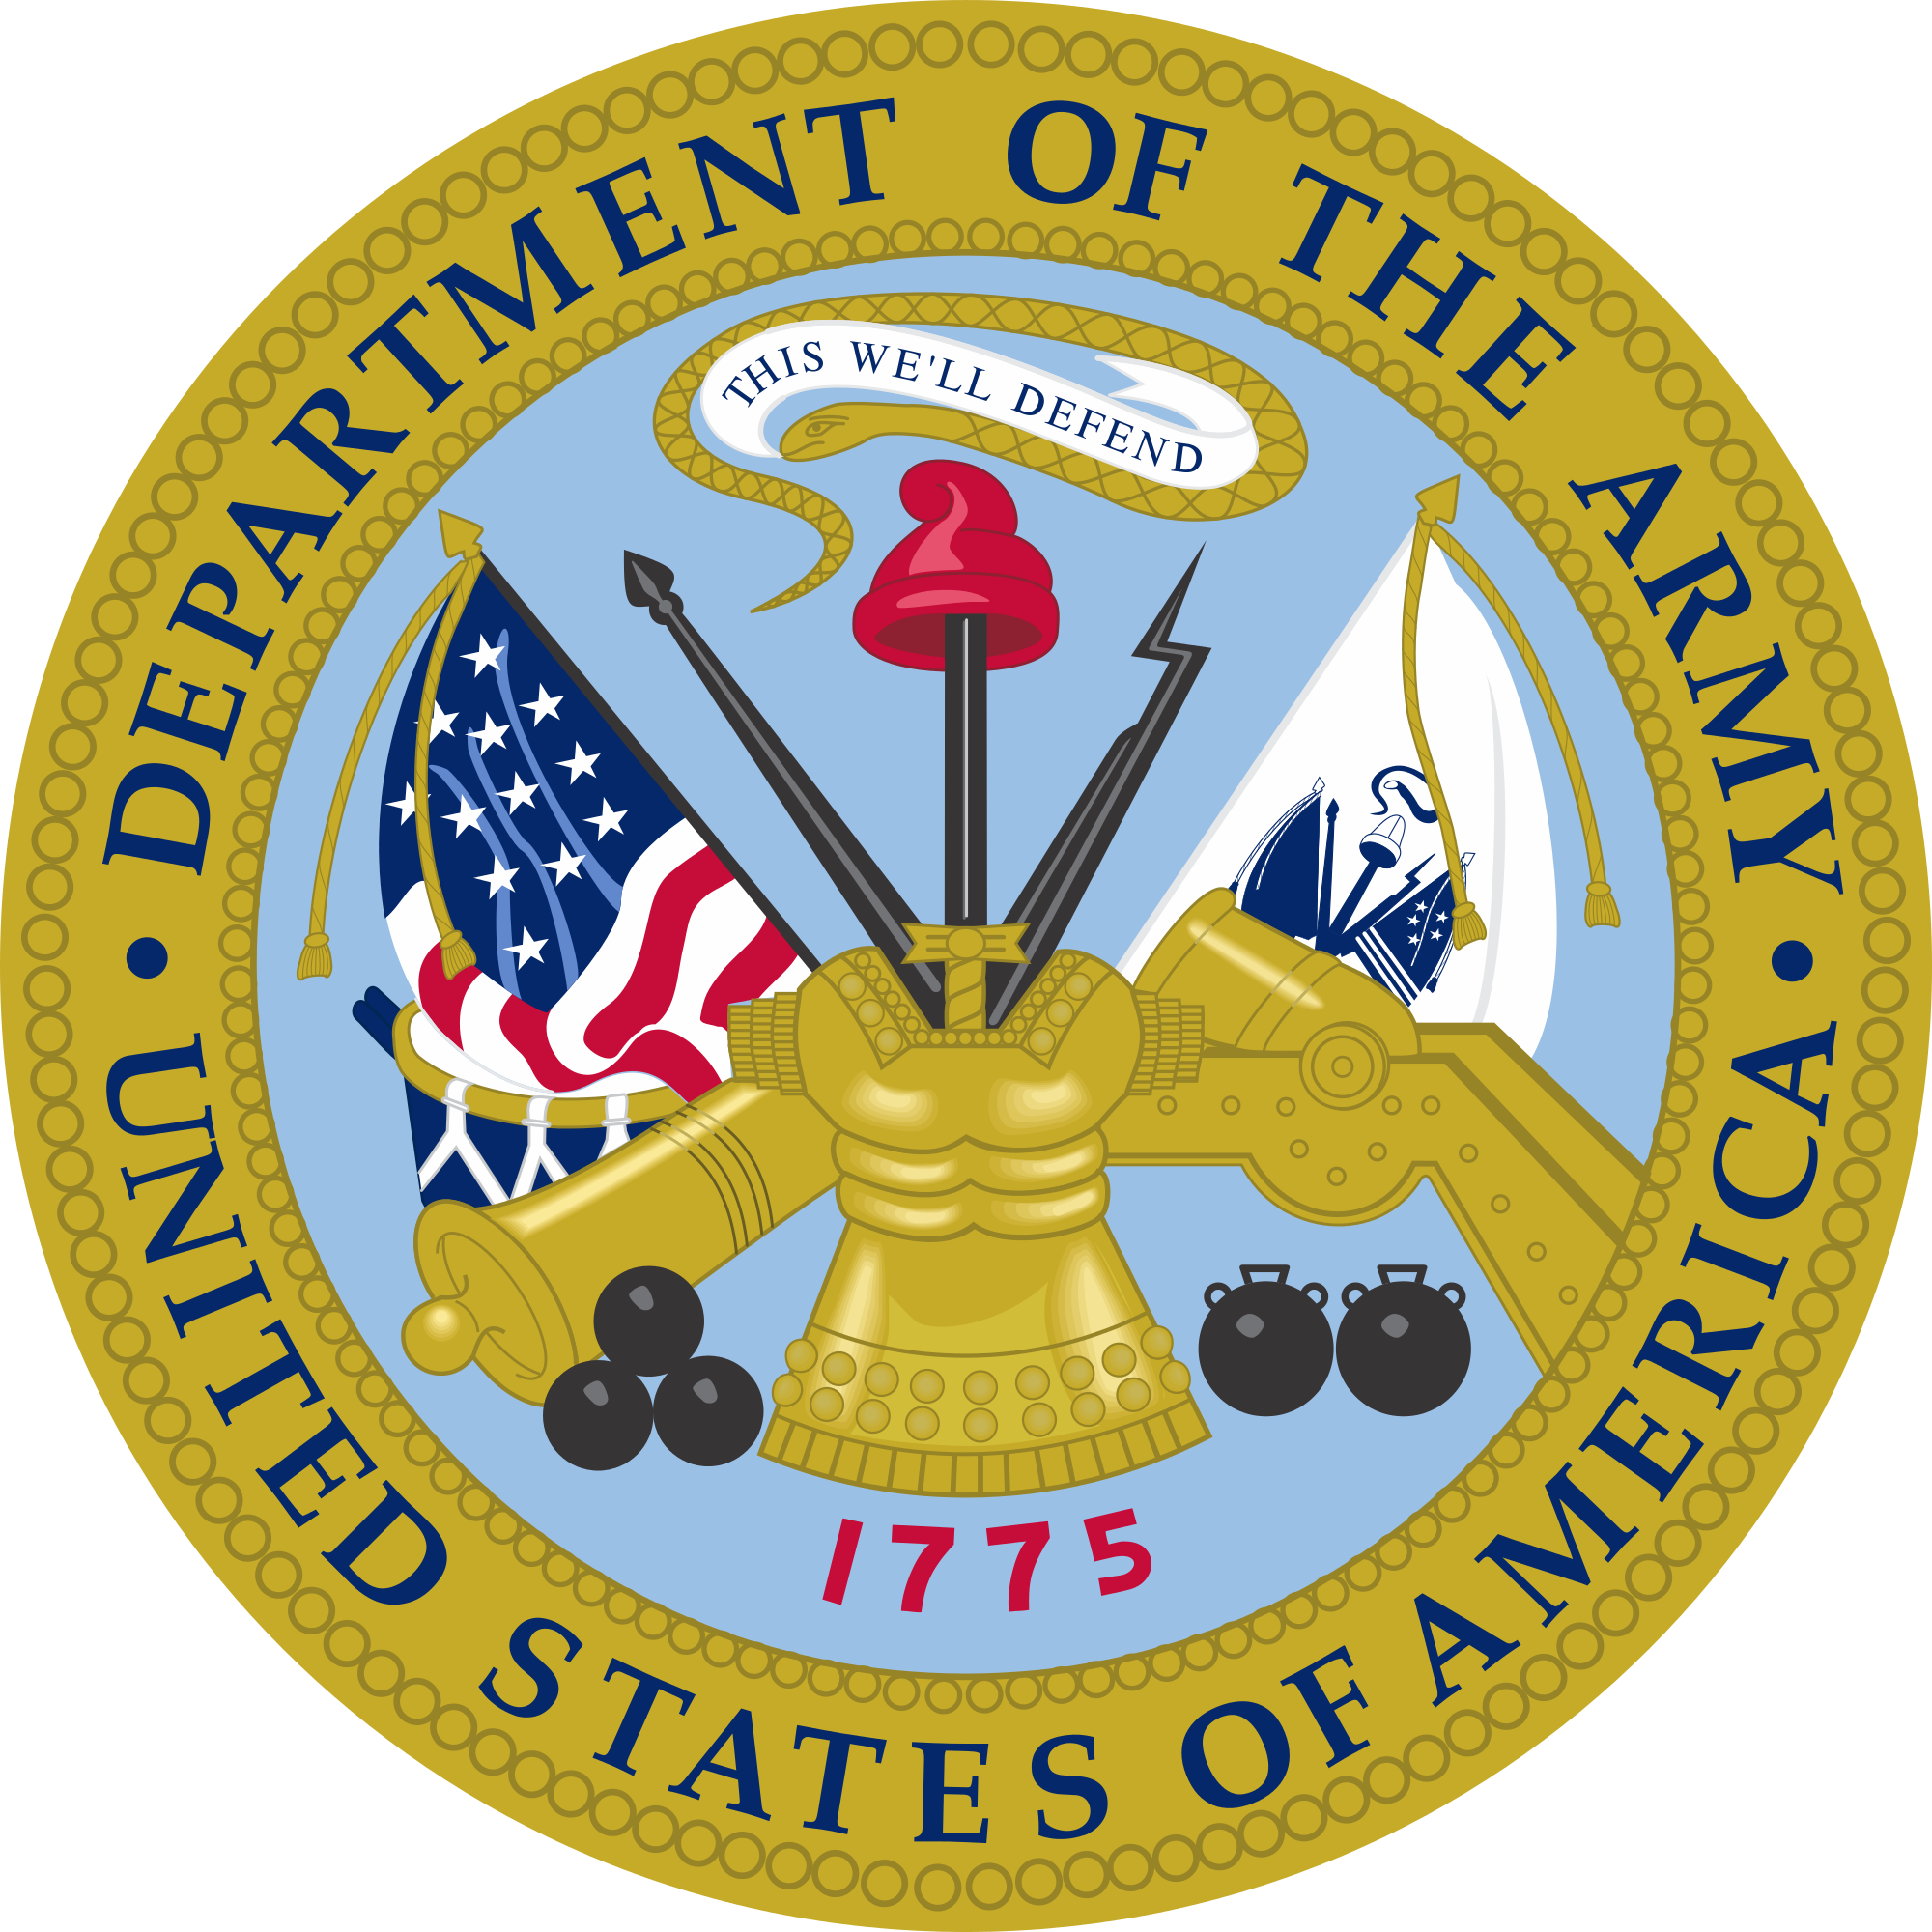 United States Army Logo Clipart - United States Army Logo Clipart (2000x2000)